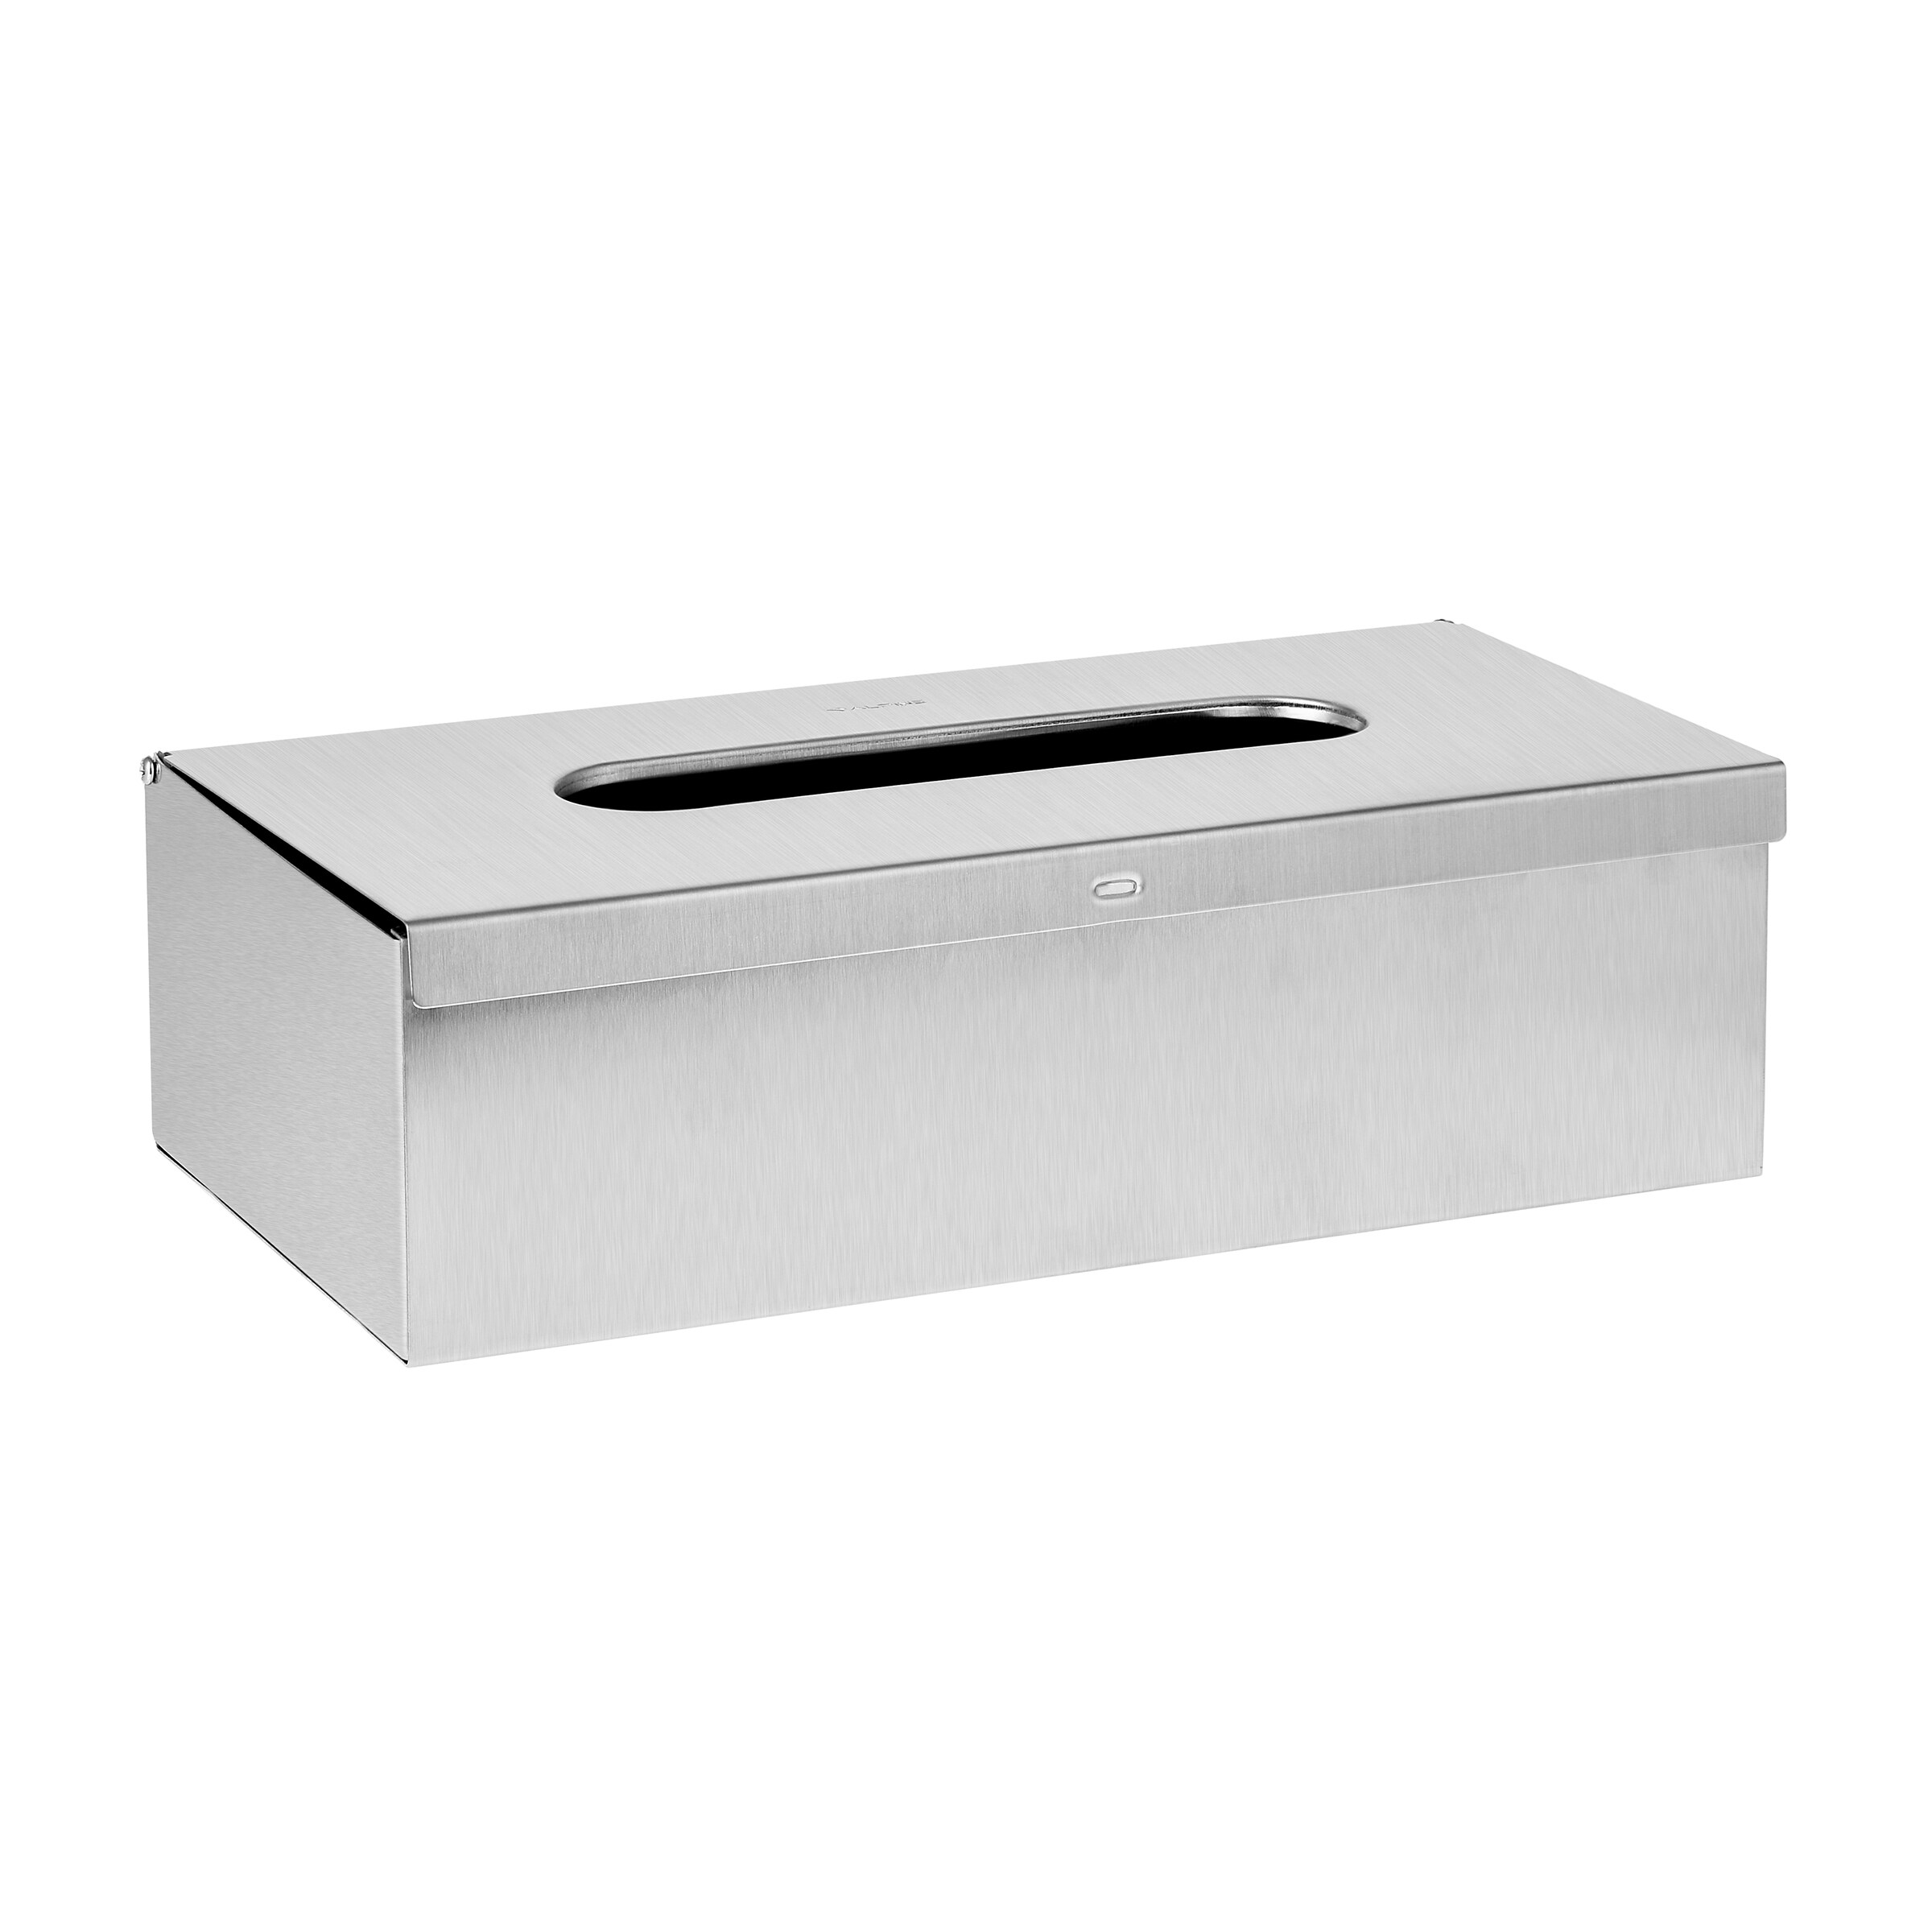 Plastic And Stainless Steel Tissue Box Cubes Squares Home Bathroom Paper Napkin 